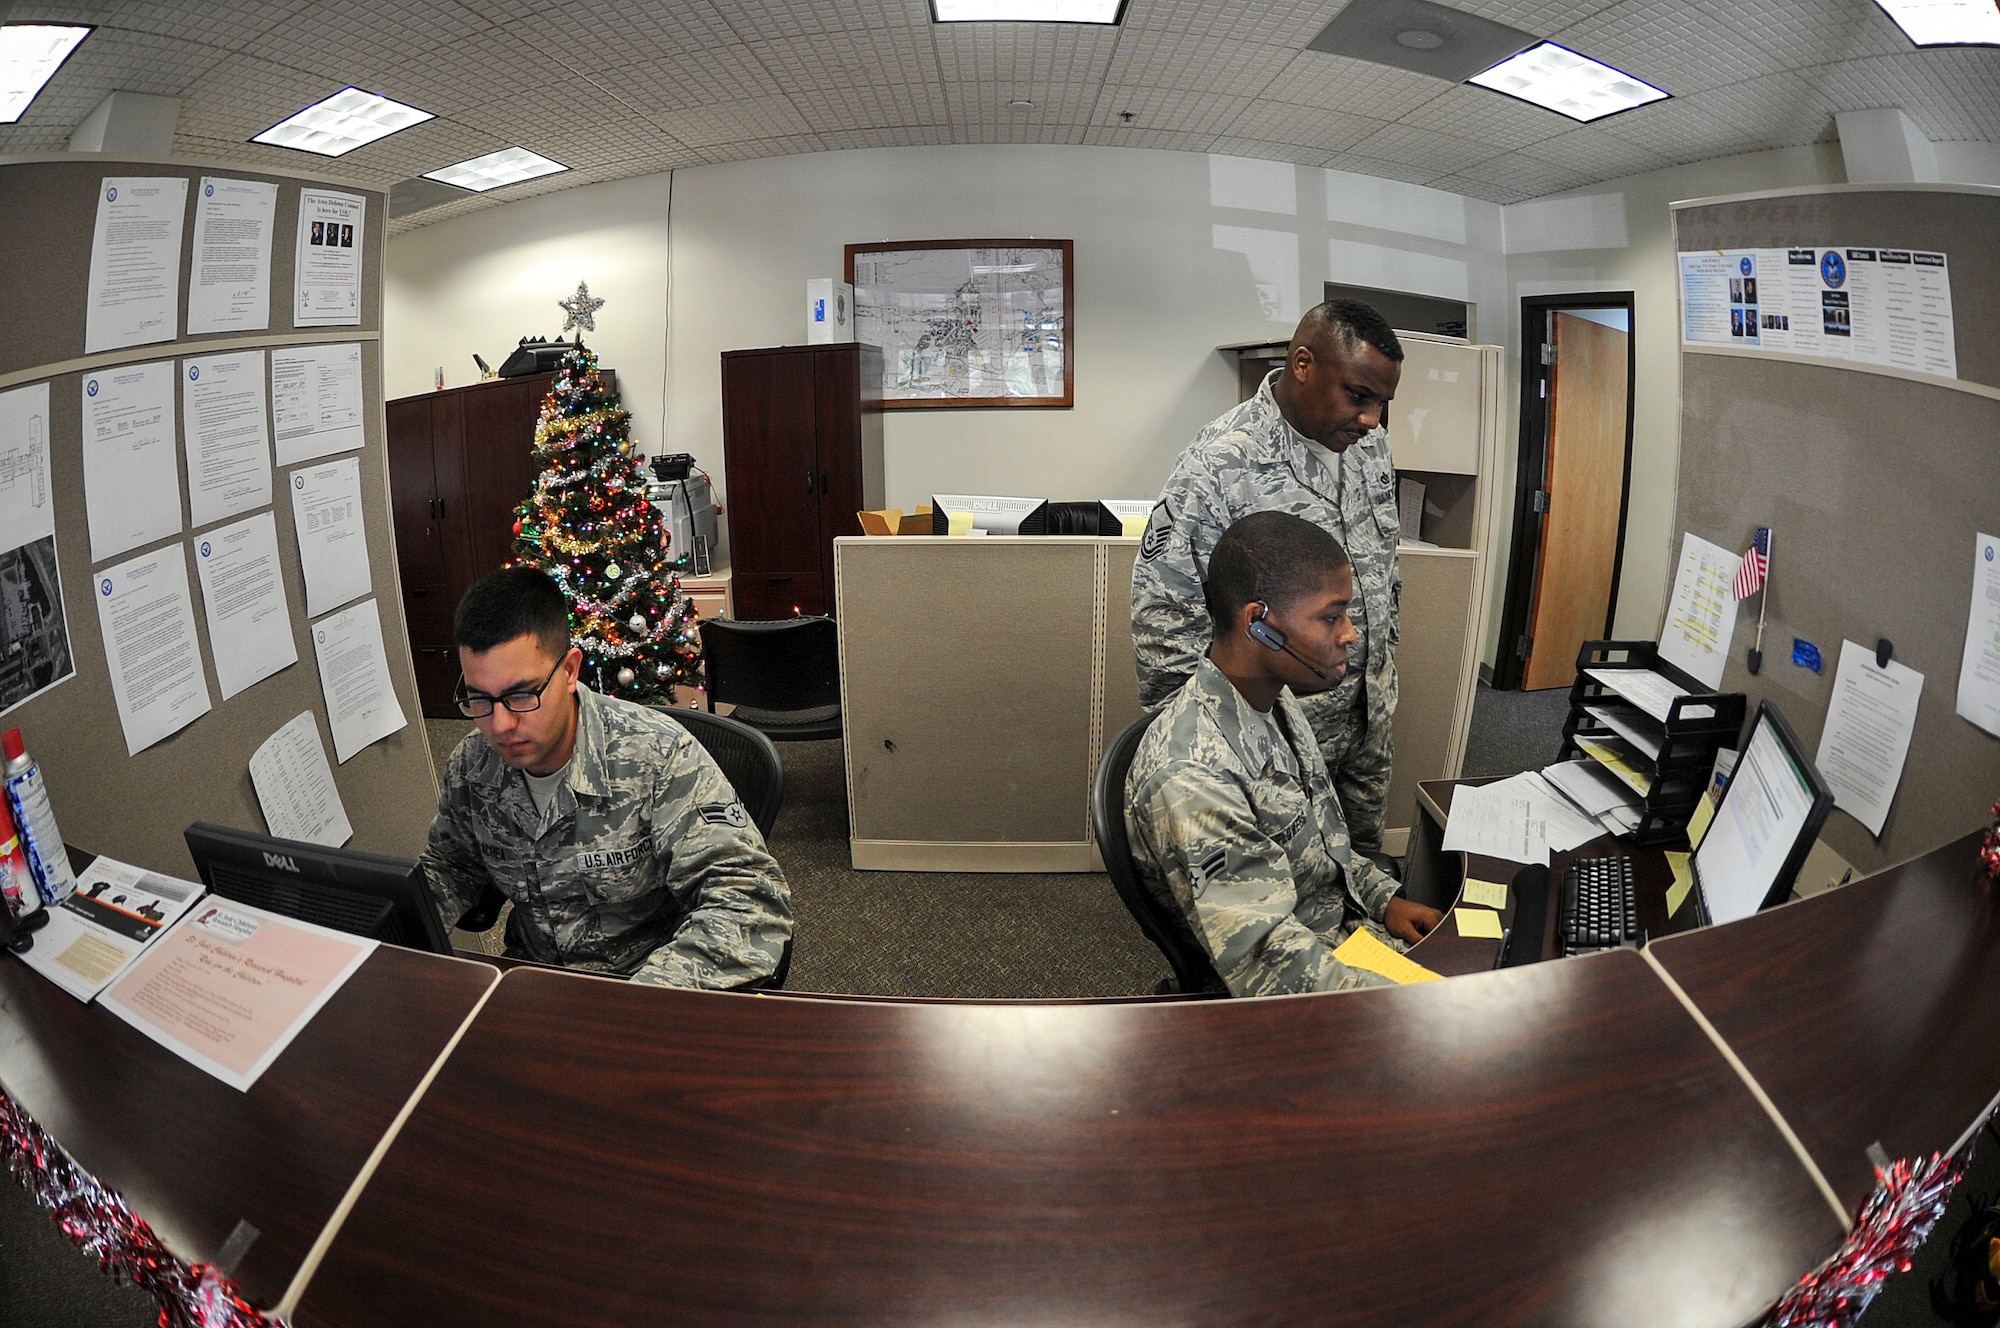 Airman 1st Class Joseph Olachea and Airman 1st Class Charles Flowers, 1st Special Operations Civil Engineering Squadron civil engineer journeyman process work order requests at the “Fish Bowl” on Hurlburt Field, Fl., Dec. 4, 2014. The Fish Bowl is the nickname for the customer service office at the 1 SOCES. (U.S. Air Force photo/Airman 1st Class Jeff Parkinson)